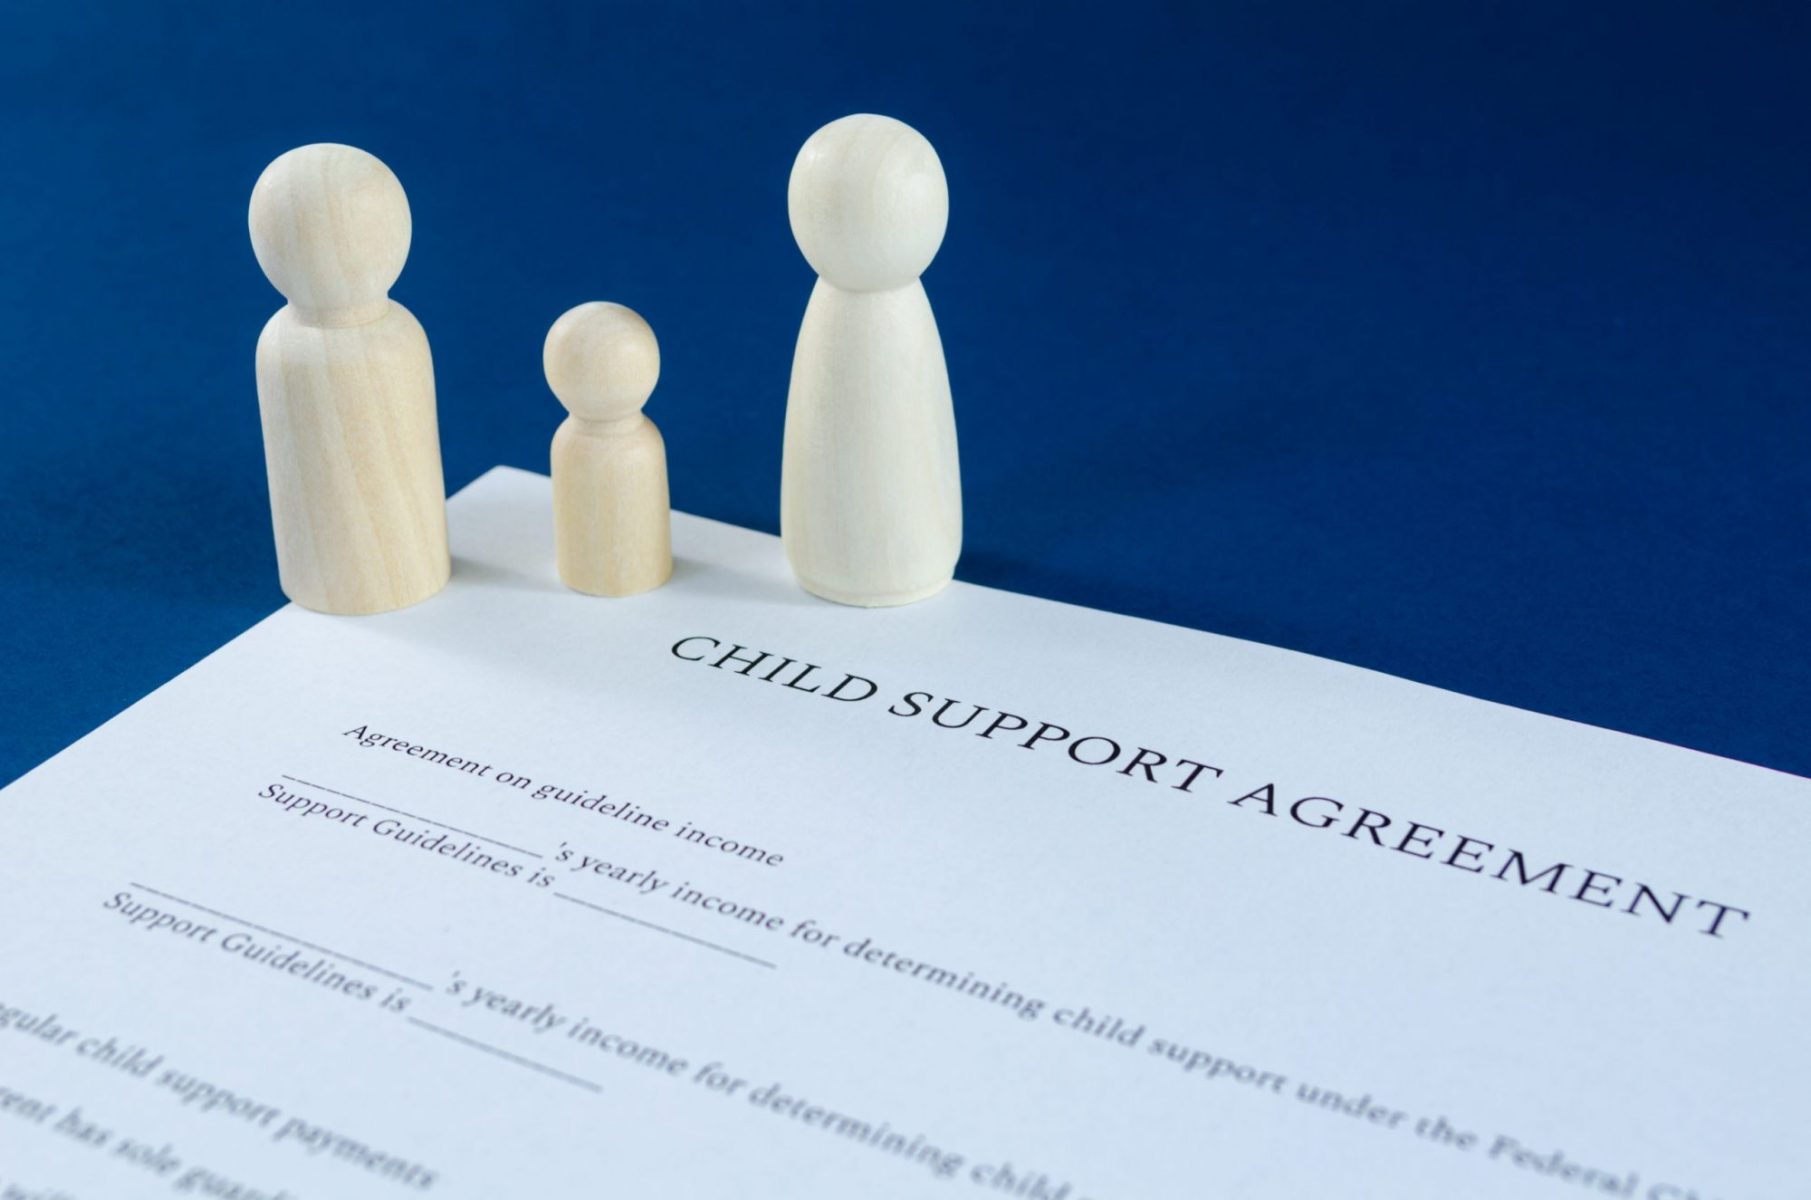 A wooden figurine family stands on a child support agreement document on the desk of an Oak Brook divorce attorney.